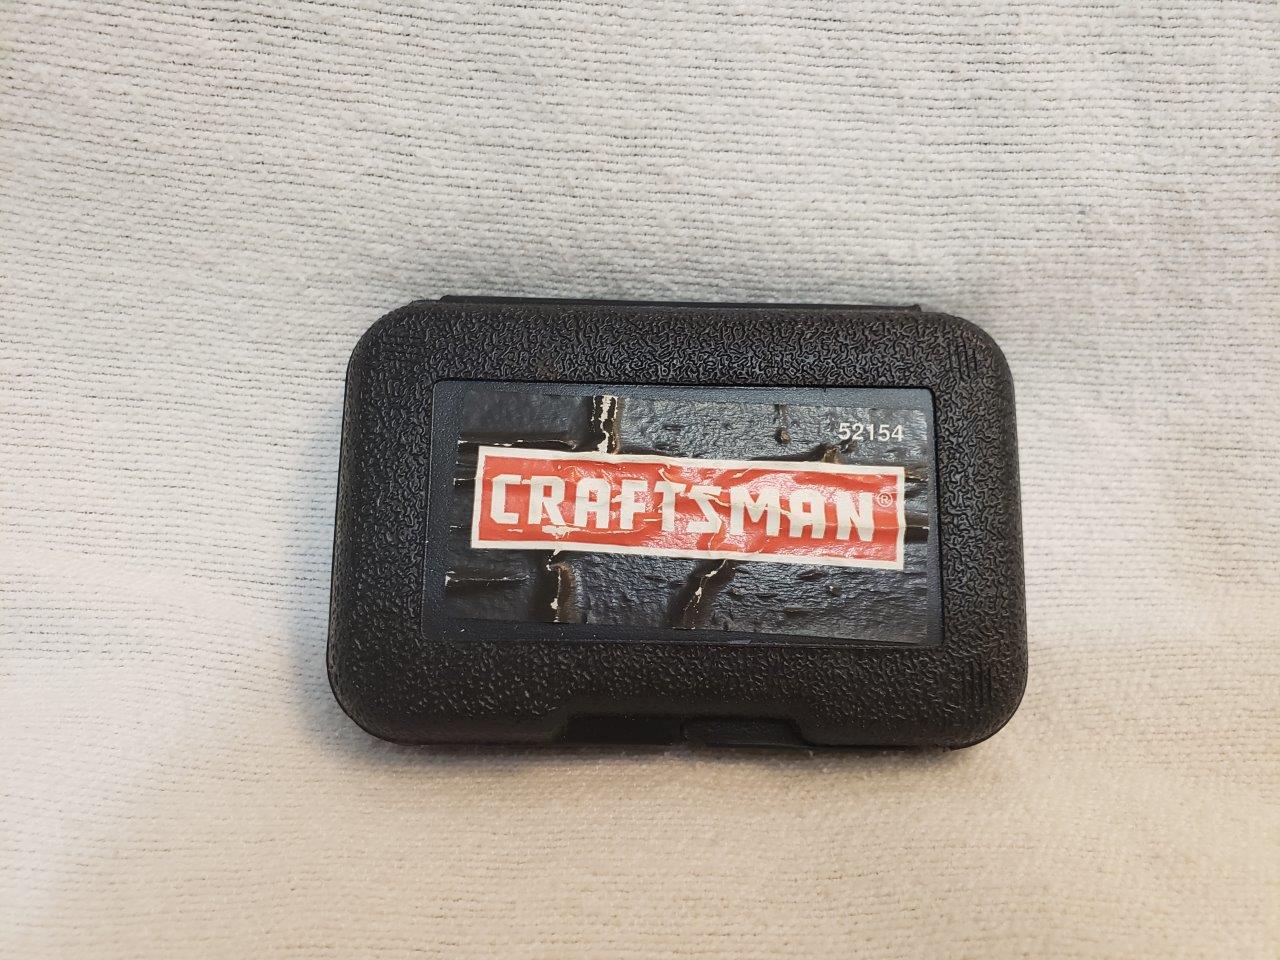 Craftsman Screw-Out Screw Removers 52154 3 Piece Set in Plastic Case